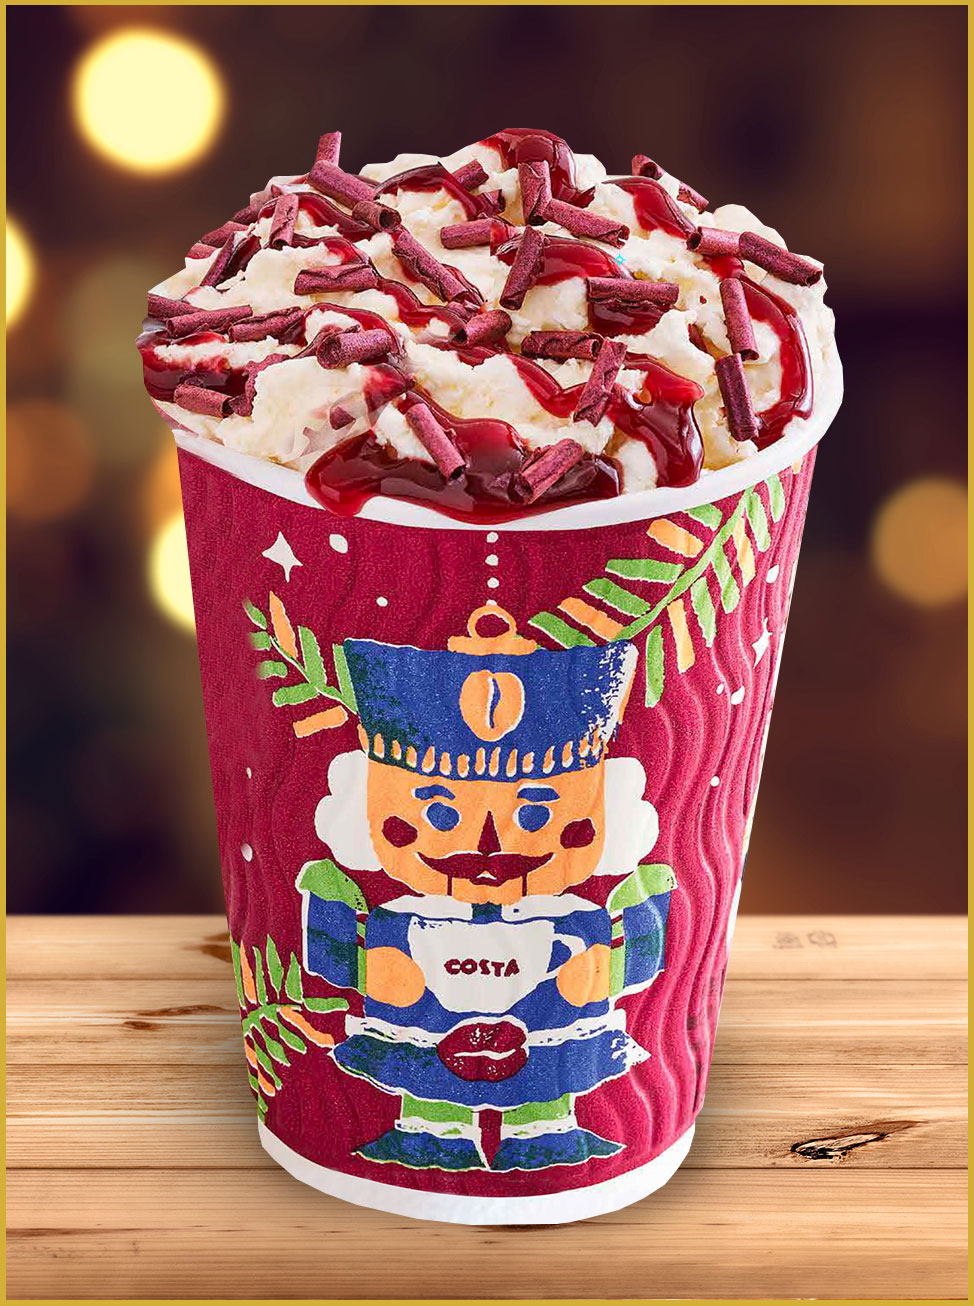 Costa Coffee Holiday Cup for 2017